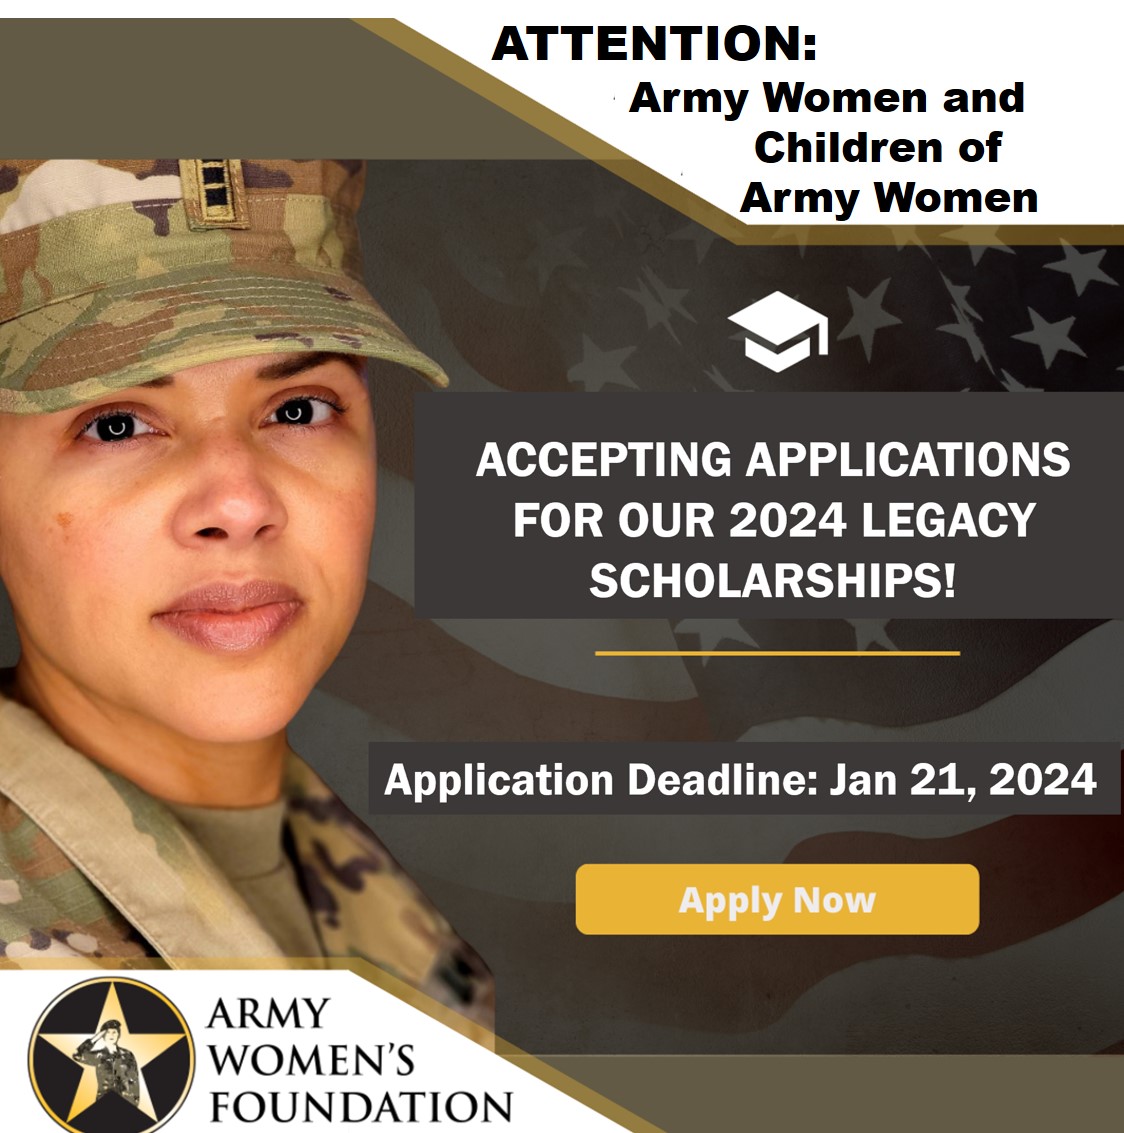 Now Accepting Applications for the 2024 Legacy Scholarships Army